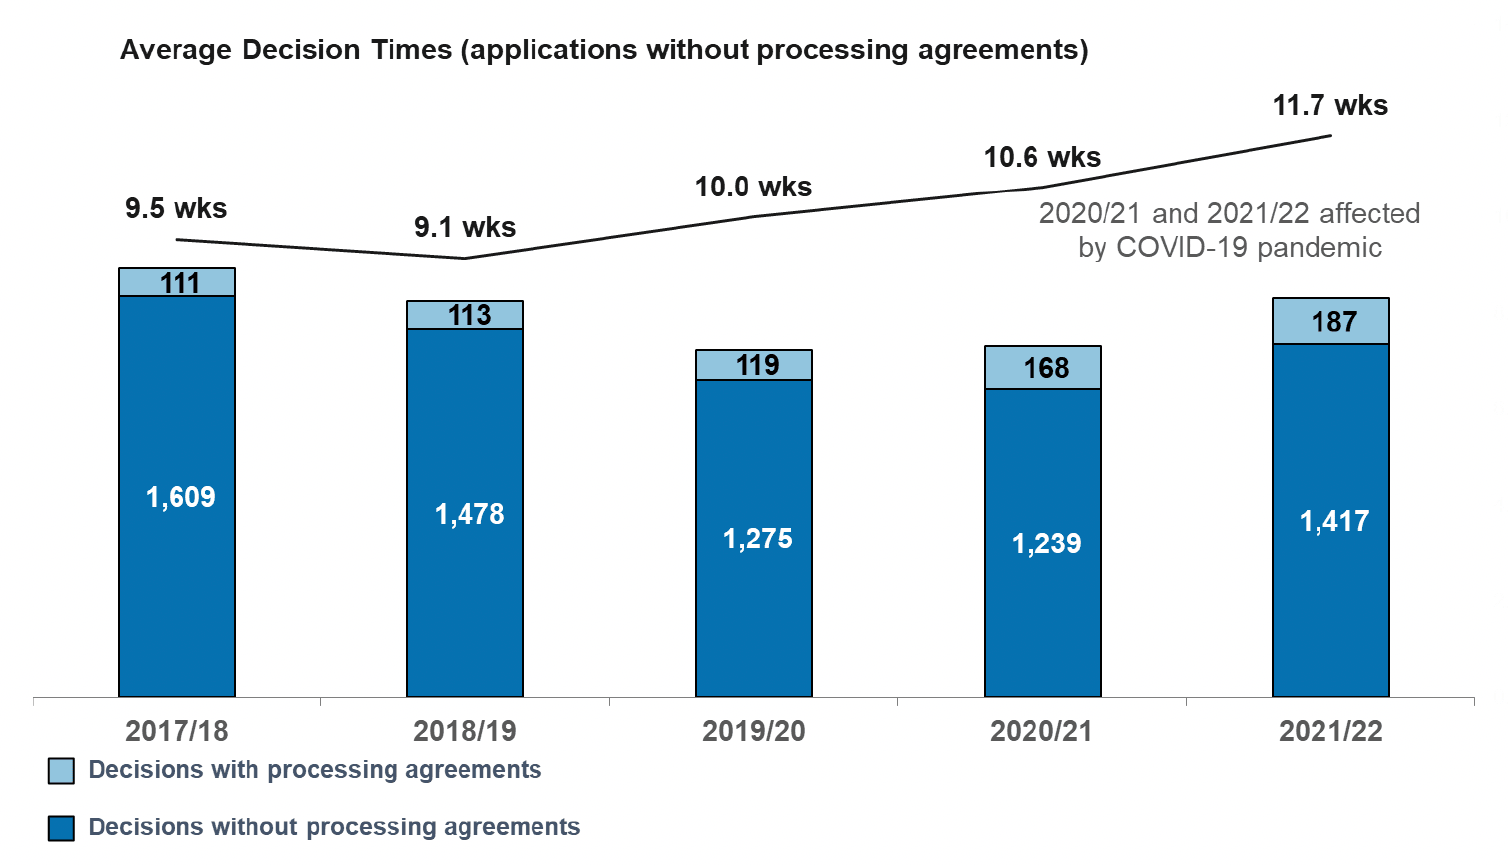 A stacked column chart showing number of local business and industry applications decided since 2017/18. Also a line chart of average decision times for those applications without processing agreements. Numbers of applications increased in 2021/22 after having dipped in the two prior years. Average decision times rose in 2020/21 and again in 2021/22 to 11.7 weeks, 1.7 weeks longer than 2019/20.